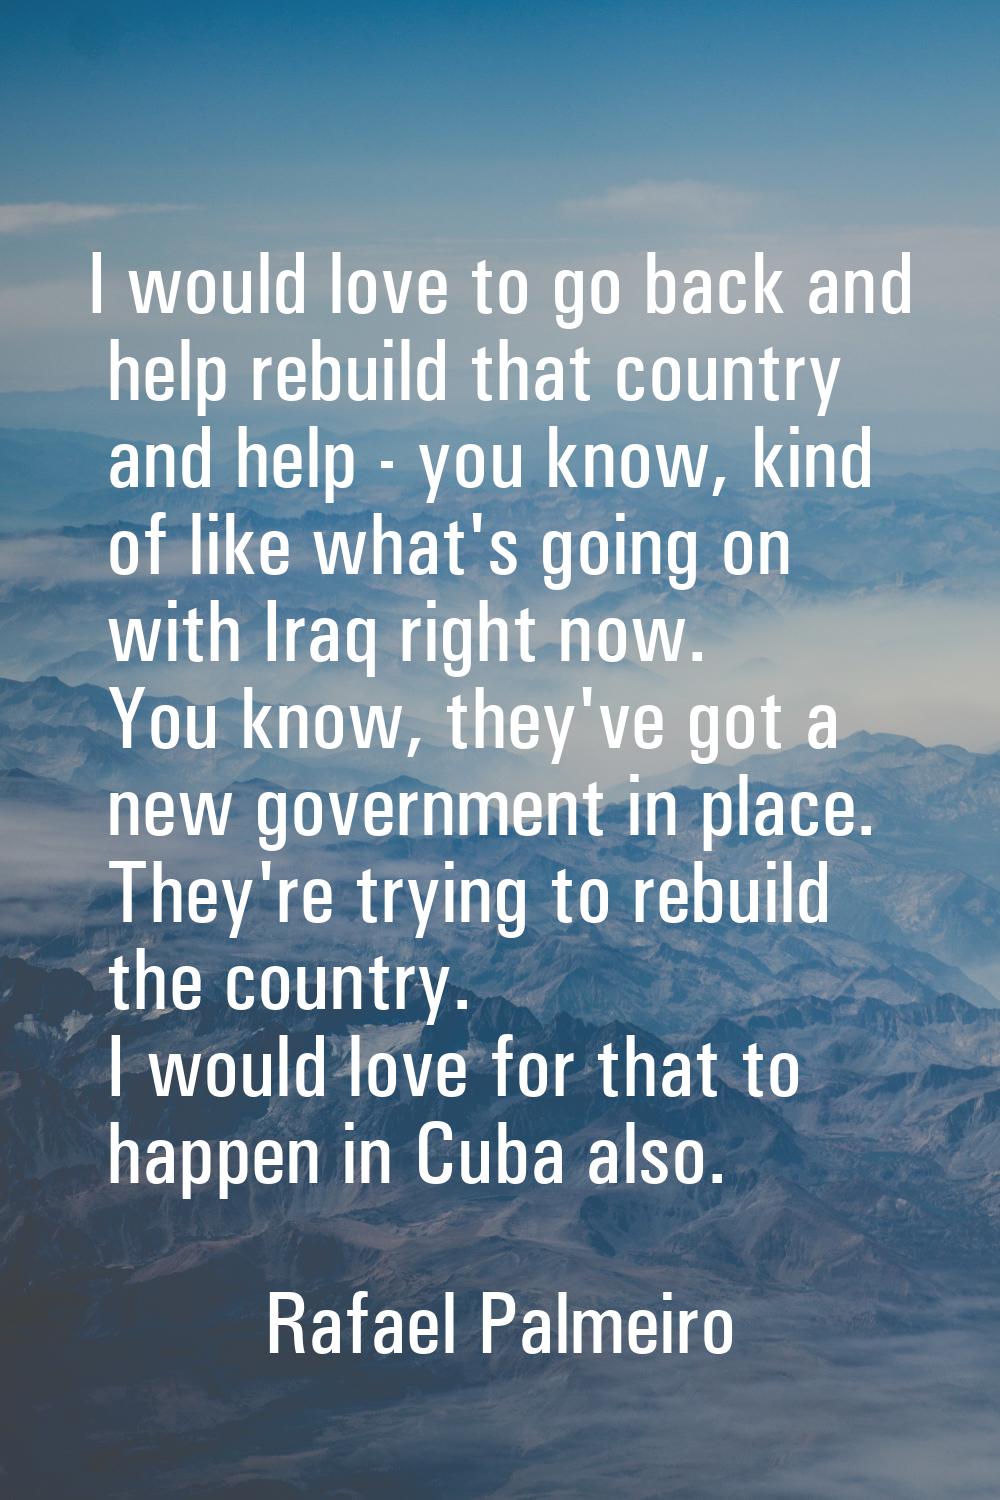 I would love to go back and help rebuild that country and help - you know, kind of like what's goin